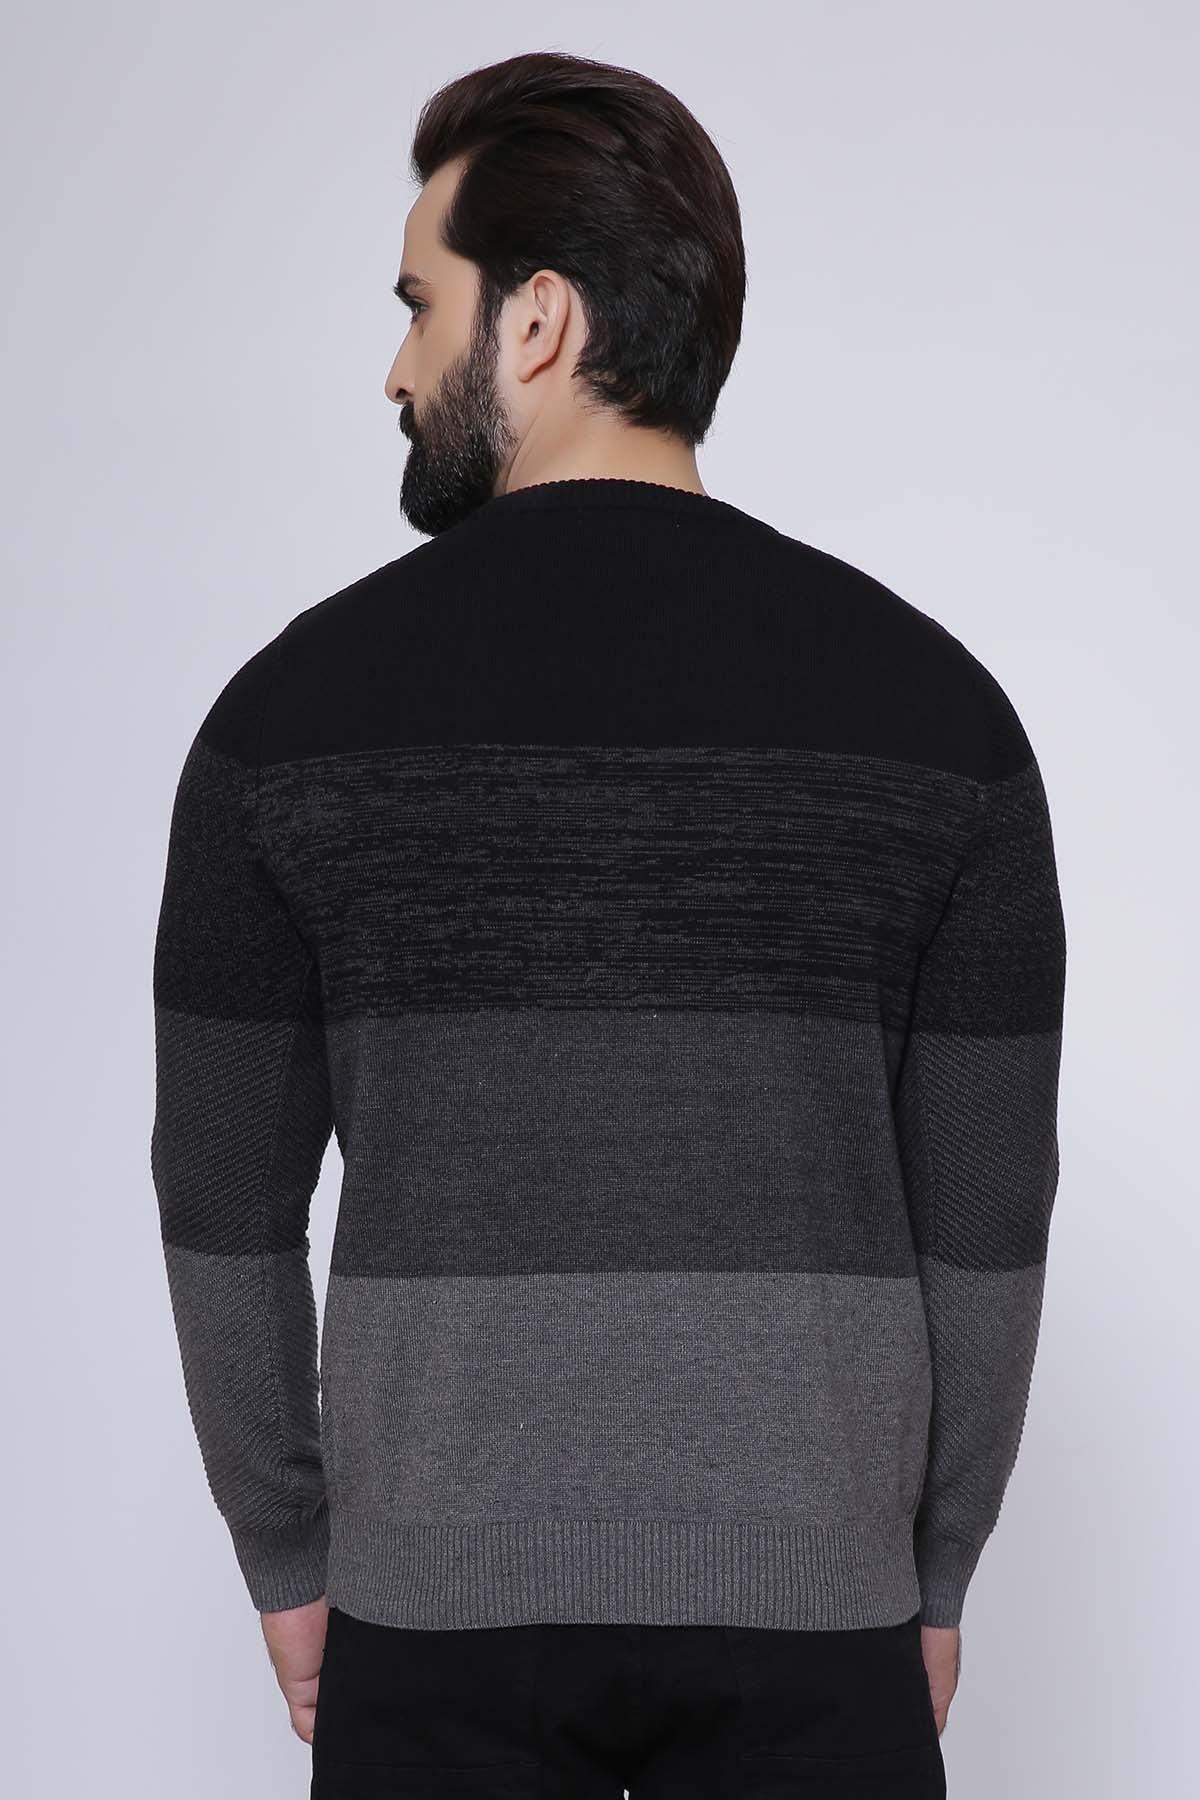 SWEATER ROUND NECK FULL BLACK GREY at Charcoal Clothing